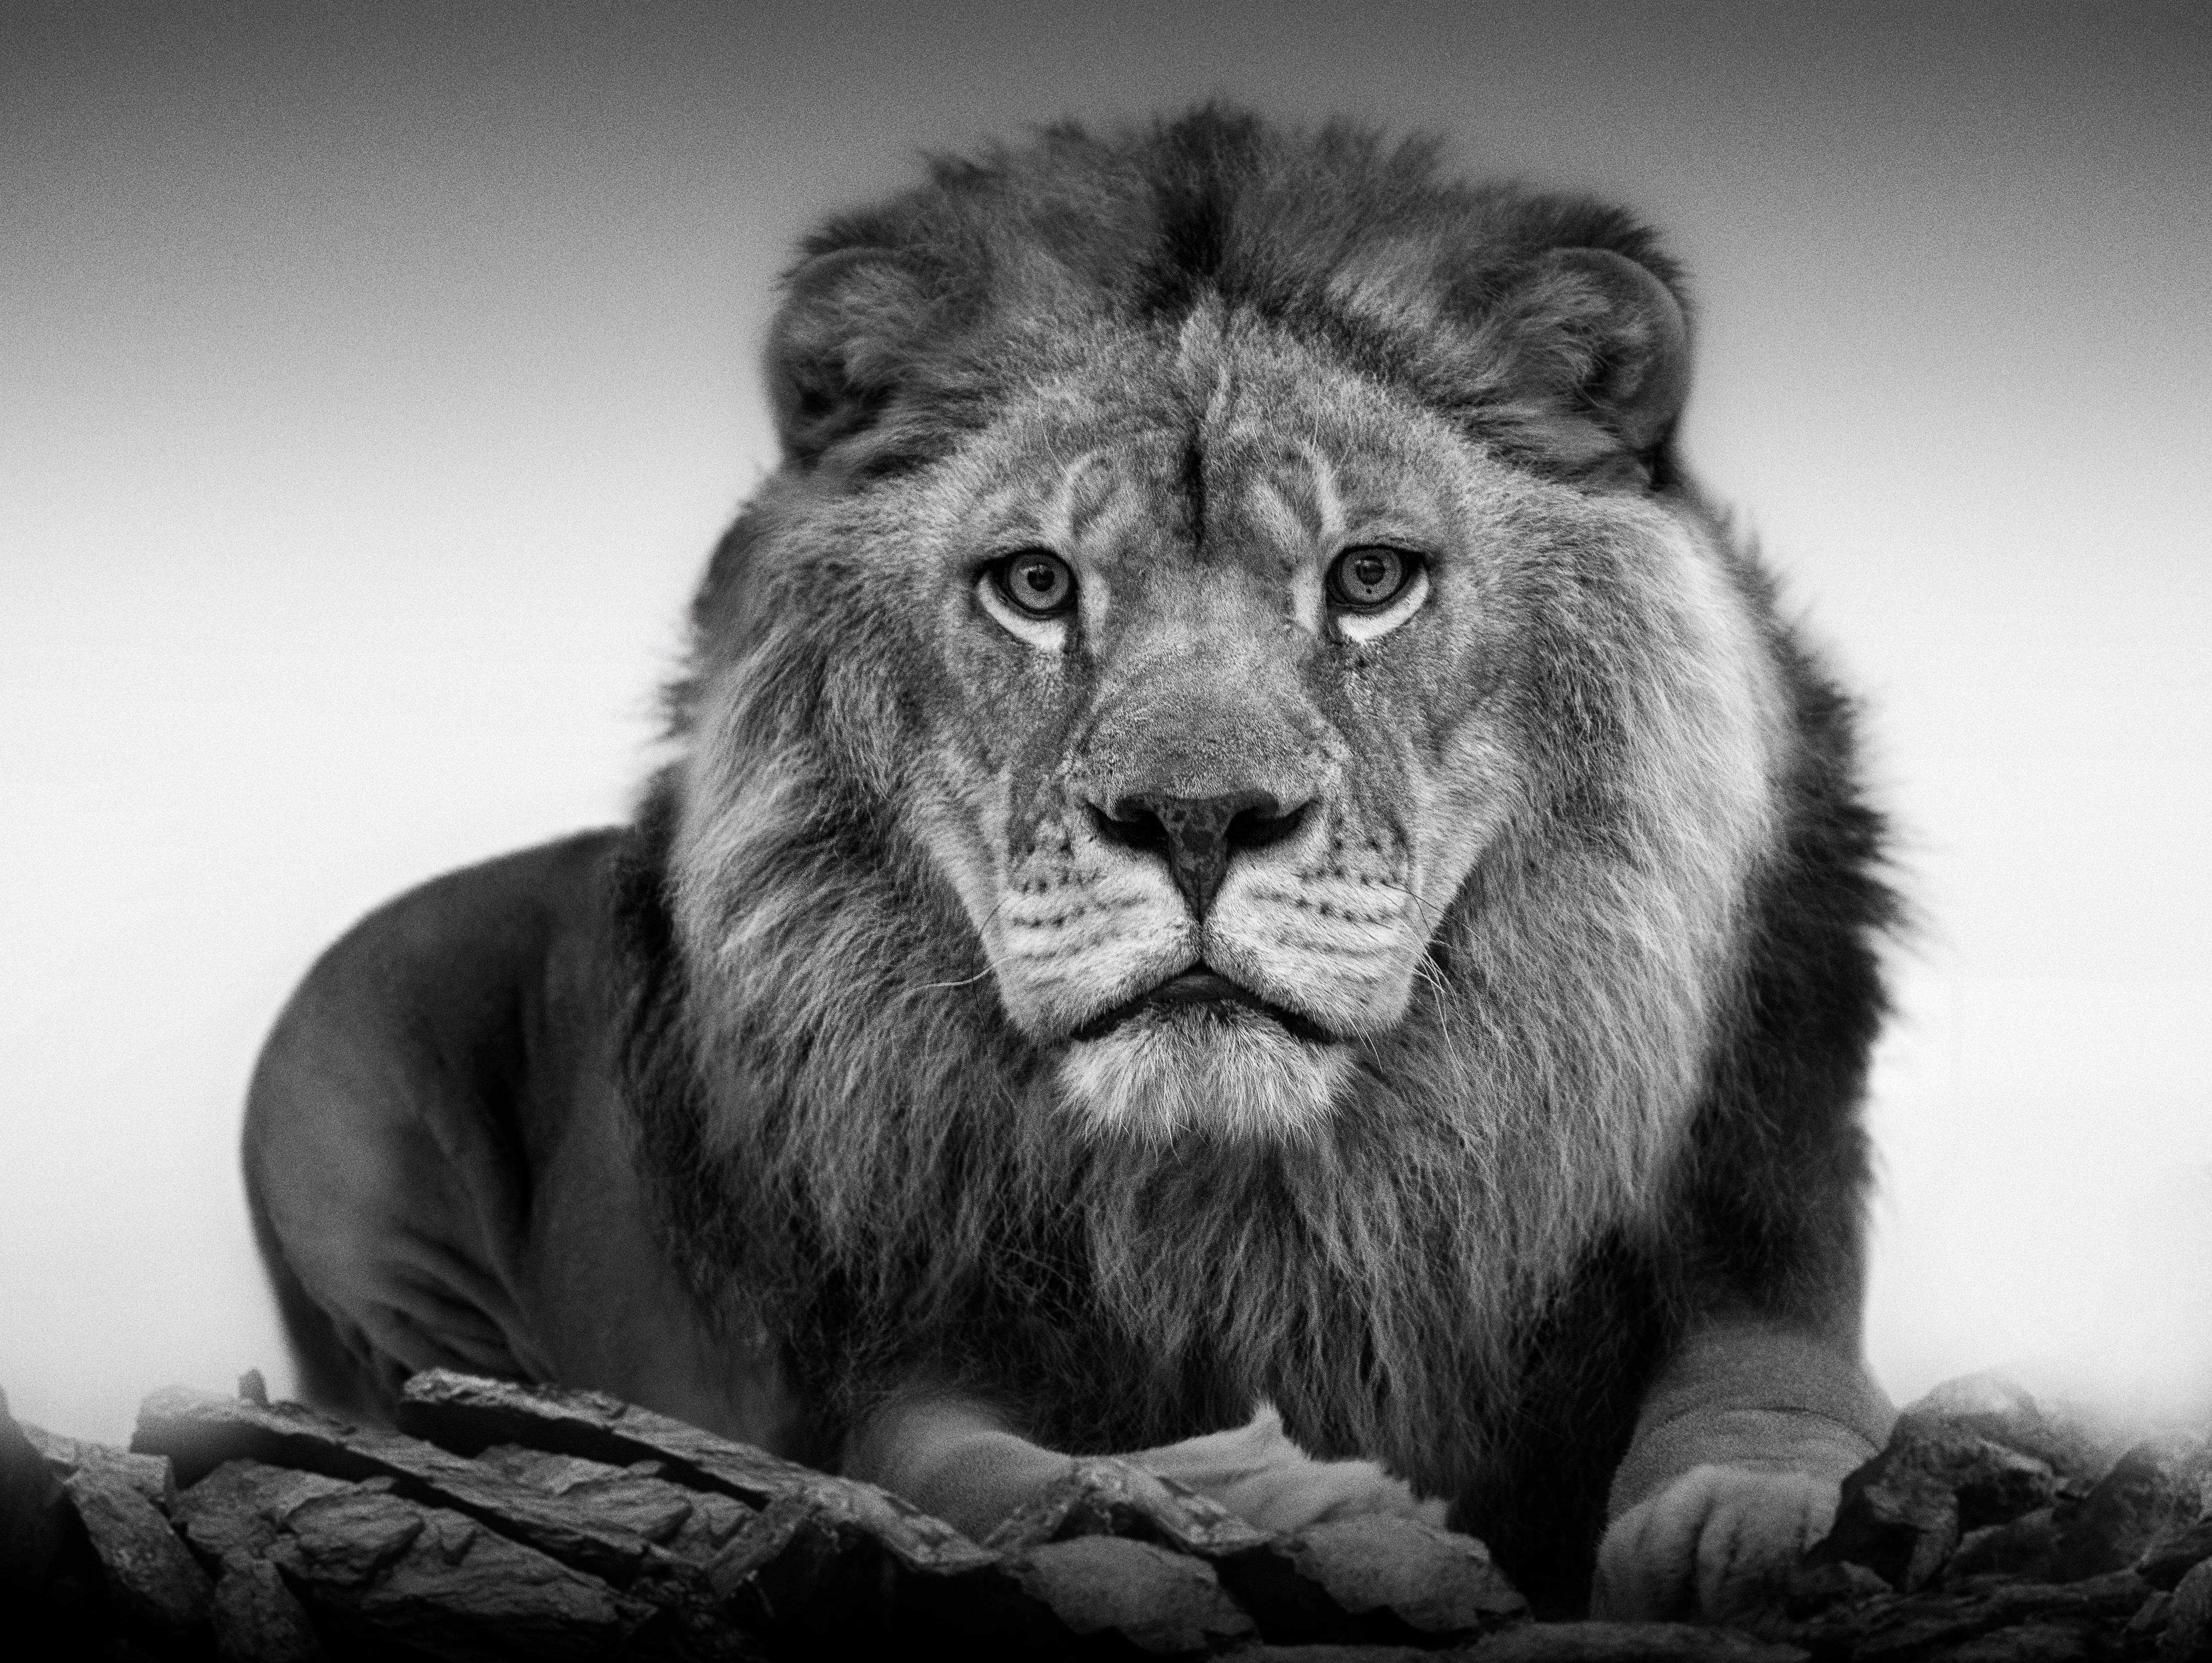 Shane Russeck Black and White Photograph -  Lion Portrait - 36x48 Black & White Photography, African lion Photograph Art